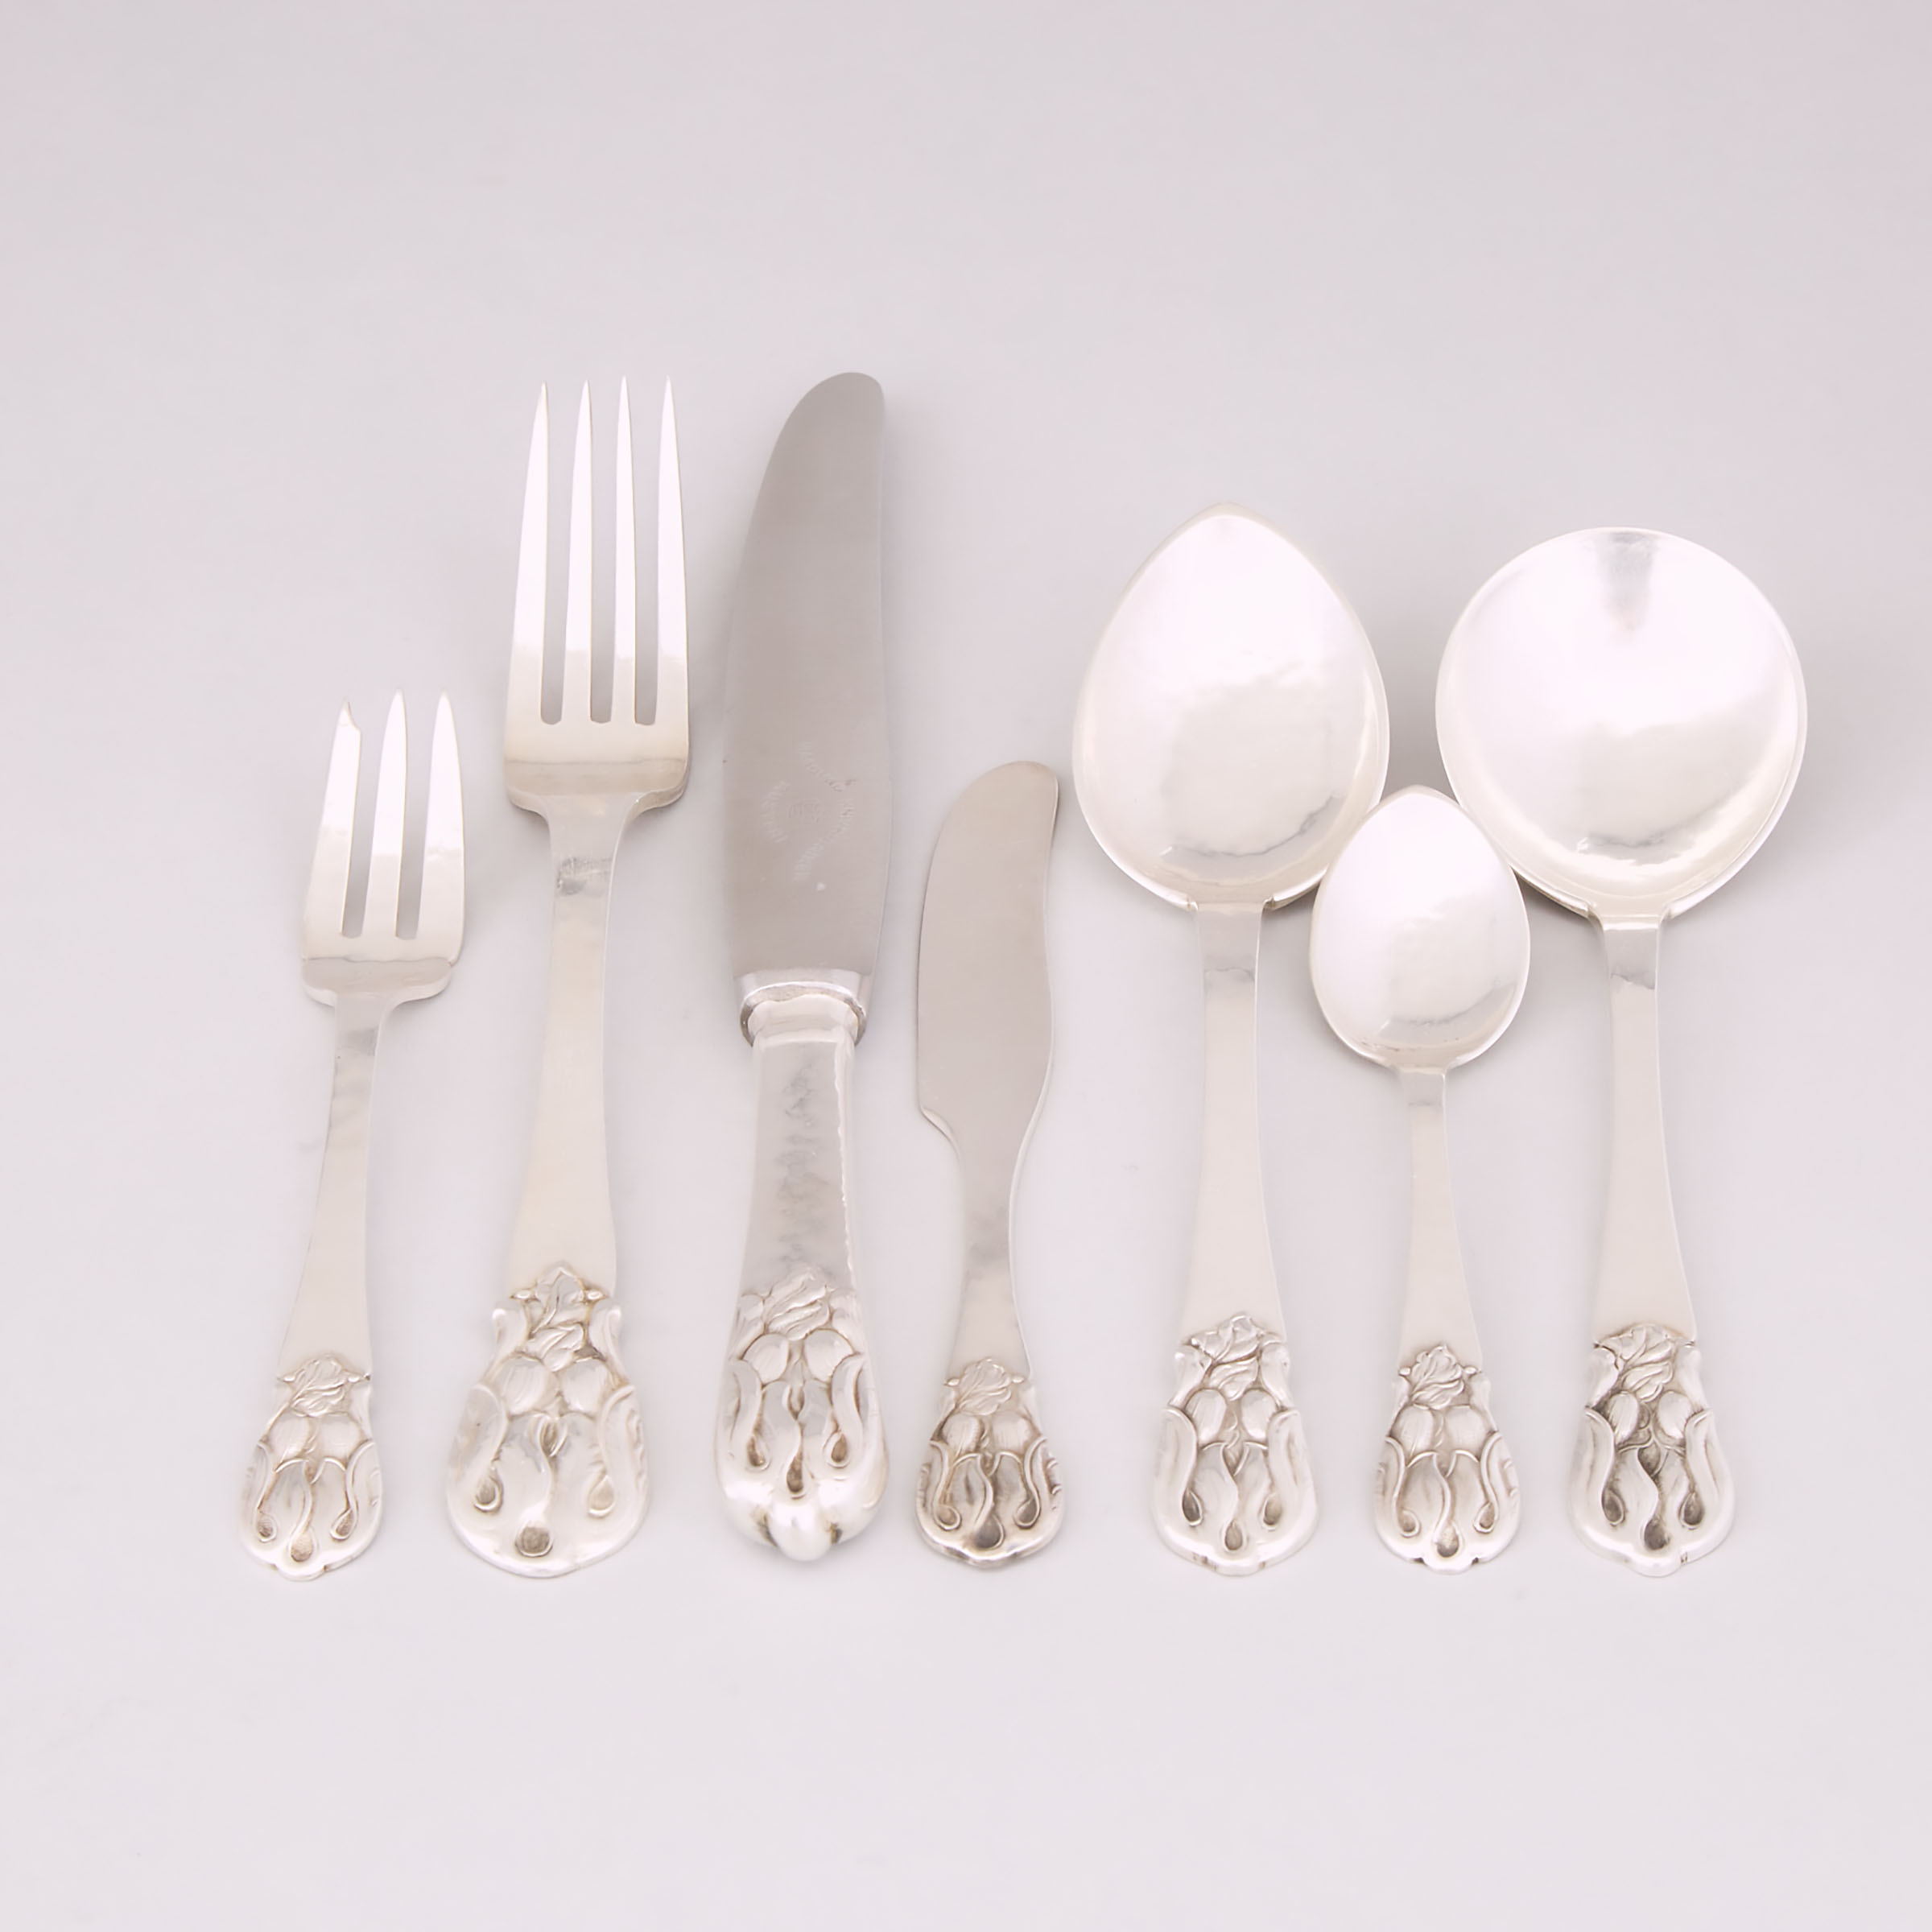 Canadian Silver 'Blossom' Pattern Flatware Service, Carl Poul Petersen, Montreal, Que., mid-20th century